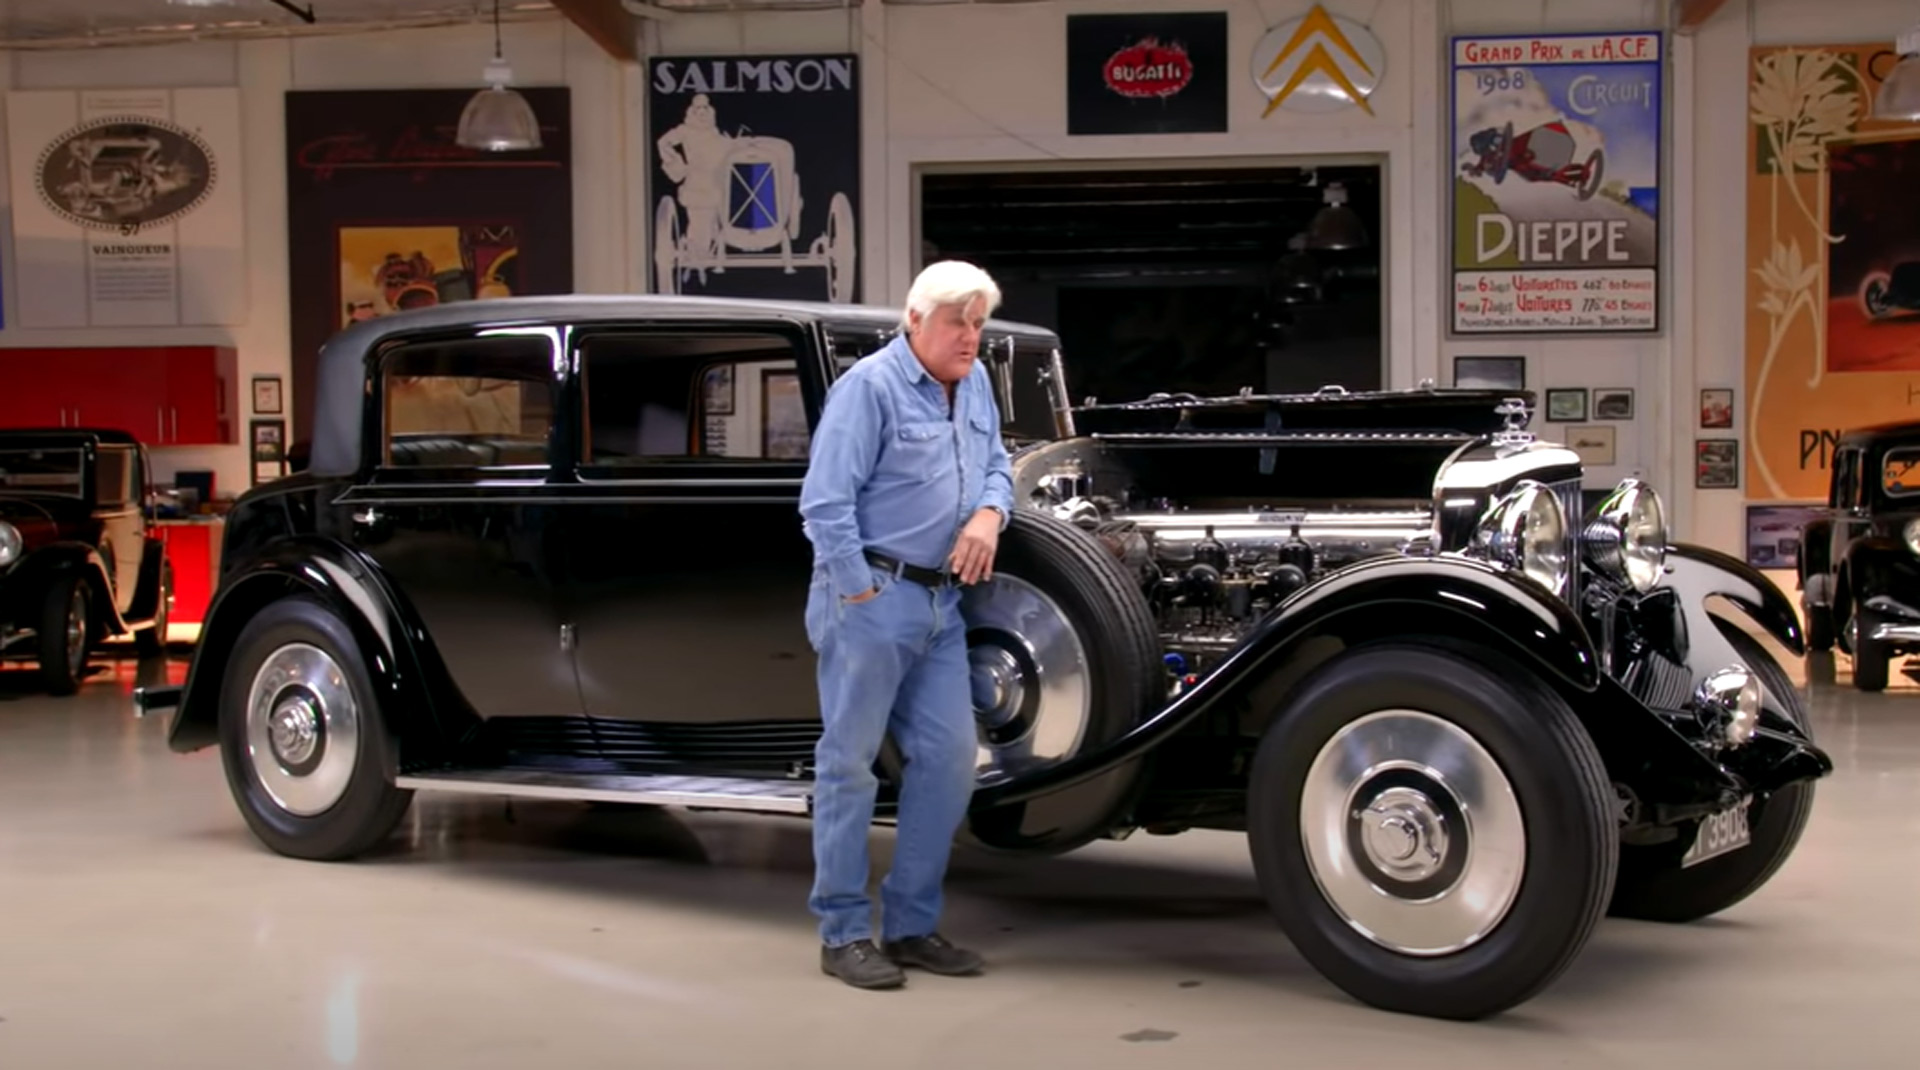 Bentley built just 100 examples of the 8 Litre, and Jay Leno has one